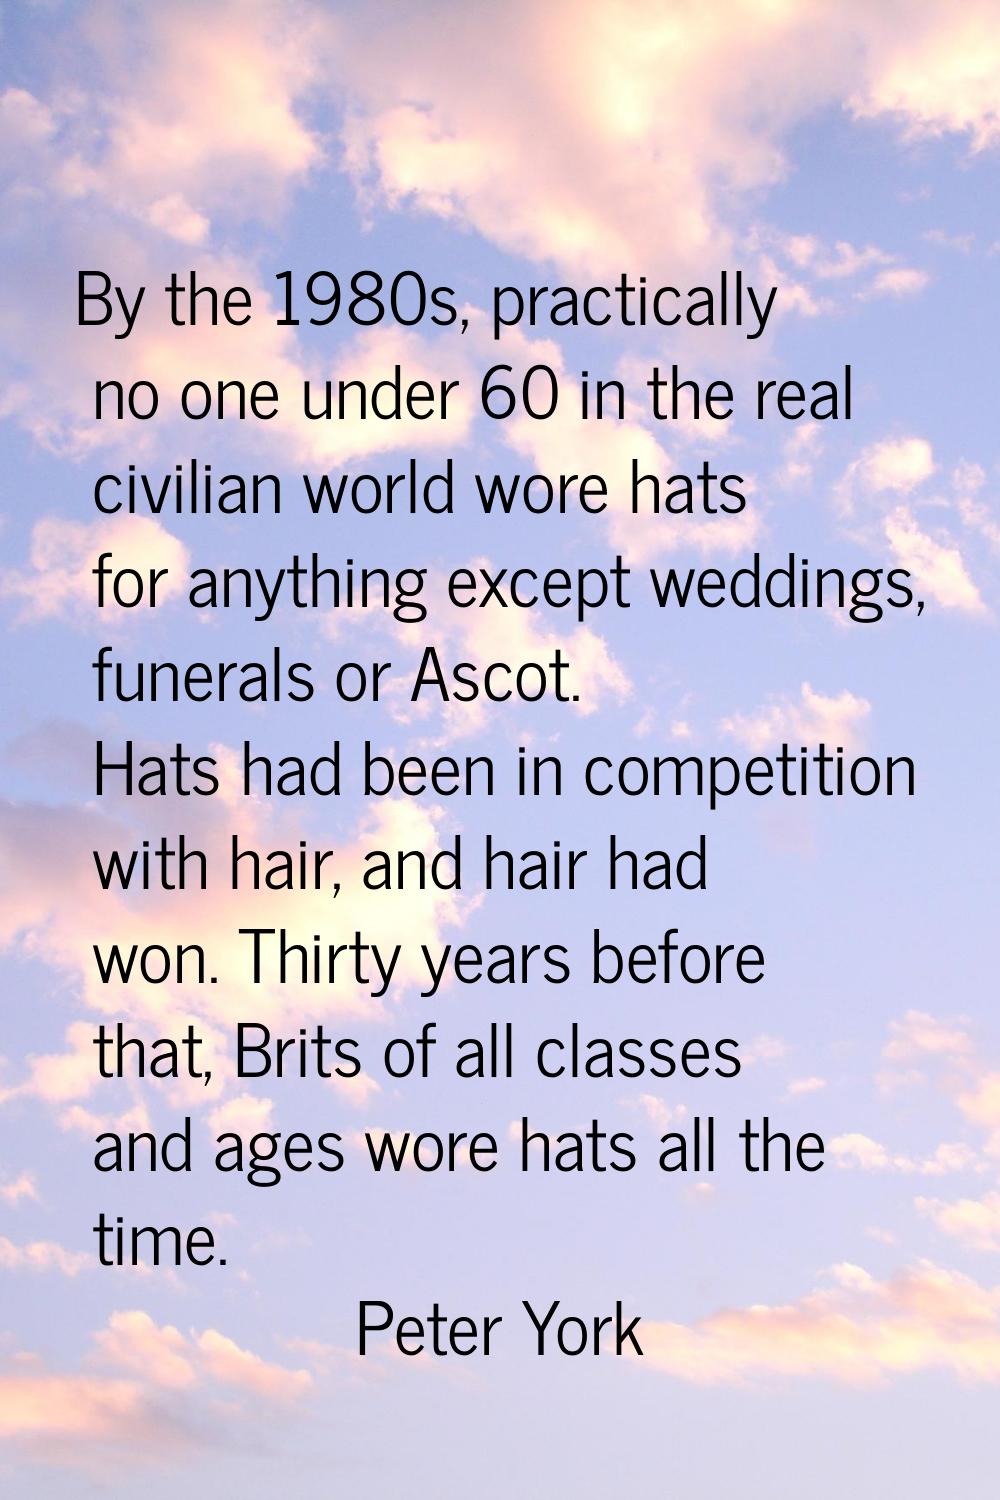 By the 1980s, practically no one under 60 in the real civilian world wore hats for anything except 